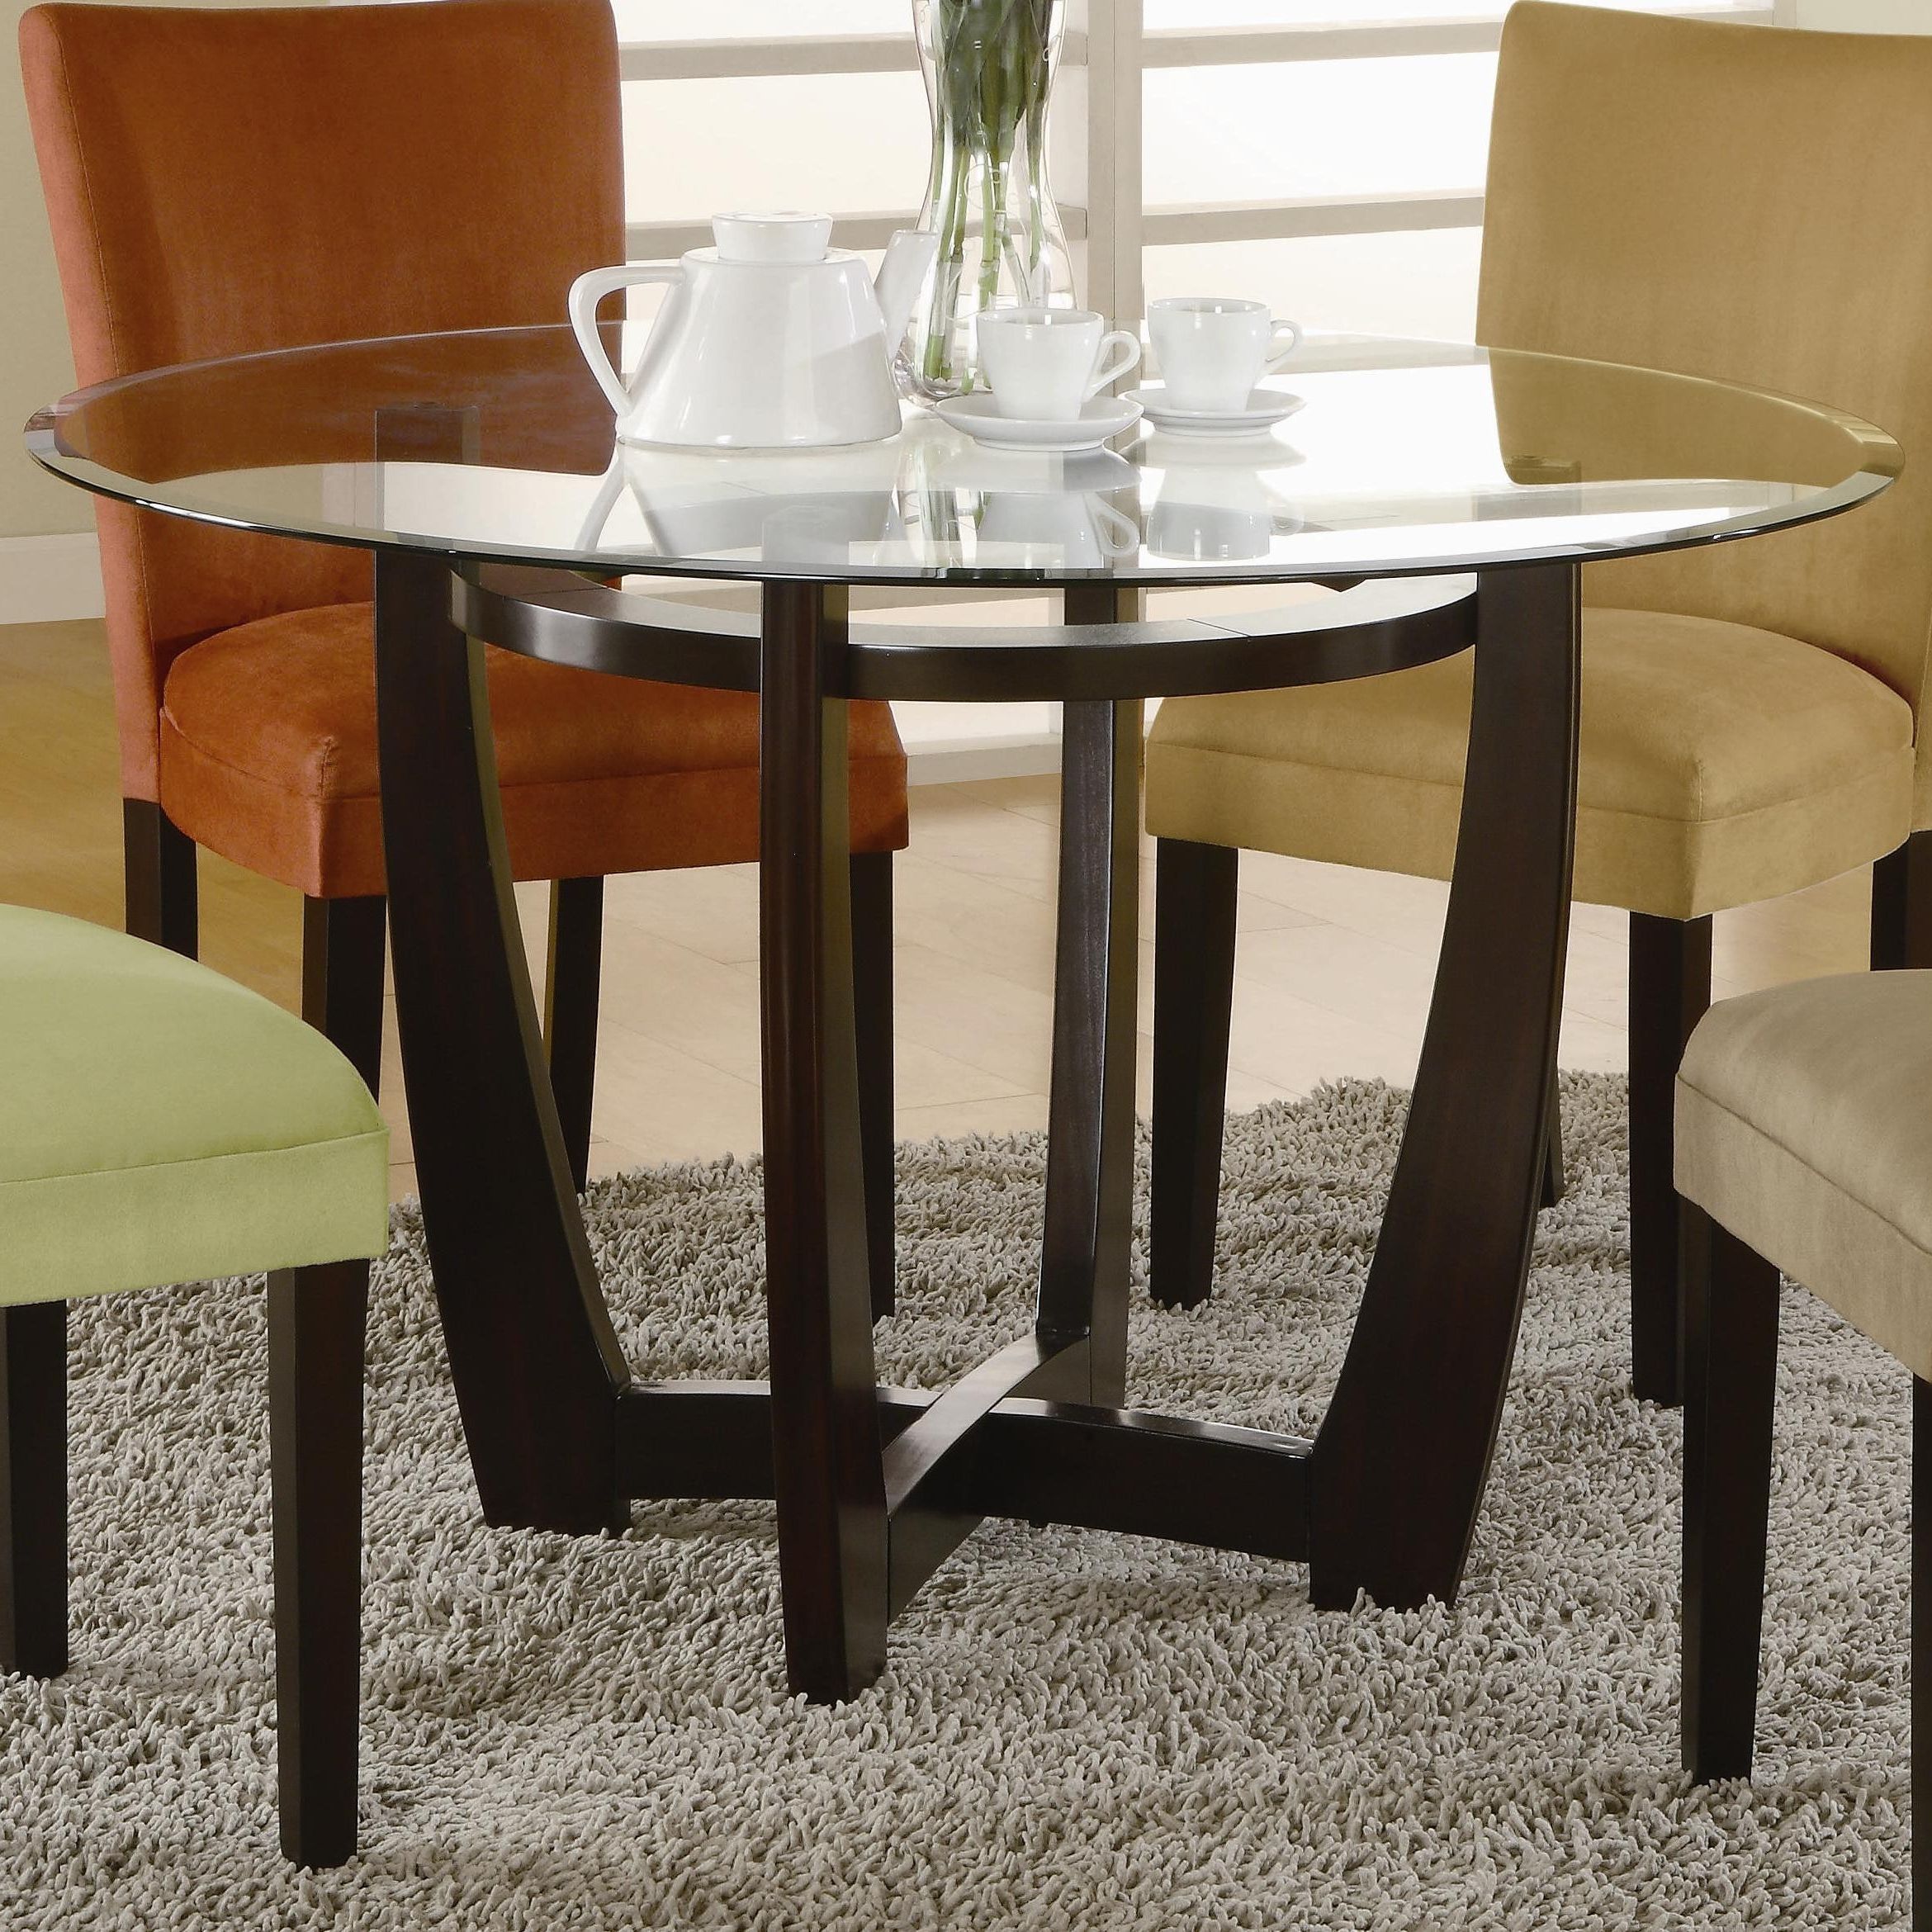 Small Glass Top Dining Table – Fedoraquick – Intended For Most Current Modern Round Glass Top Dining Tables (View 22 of 30)